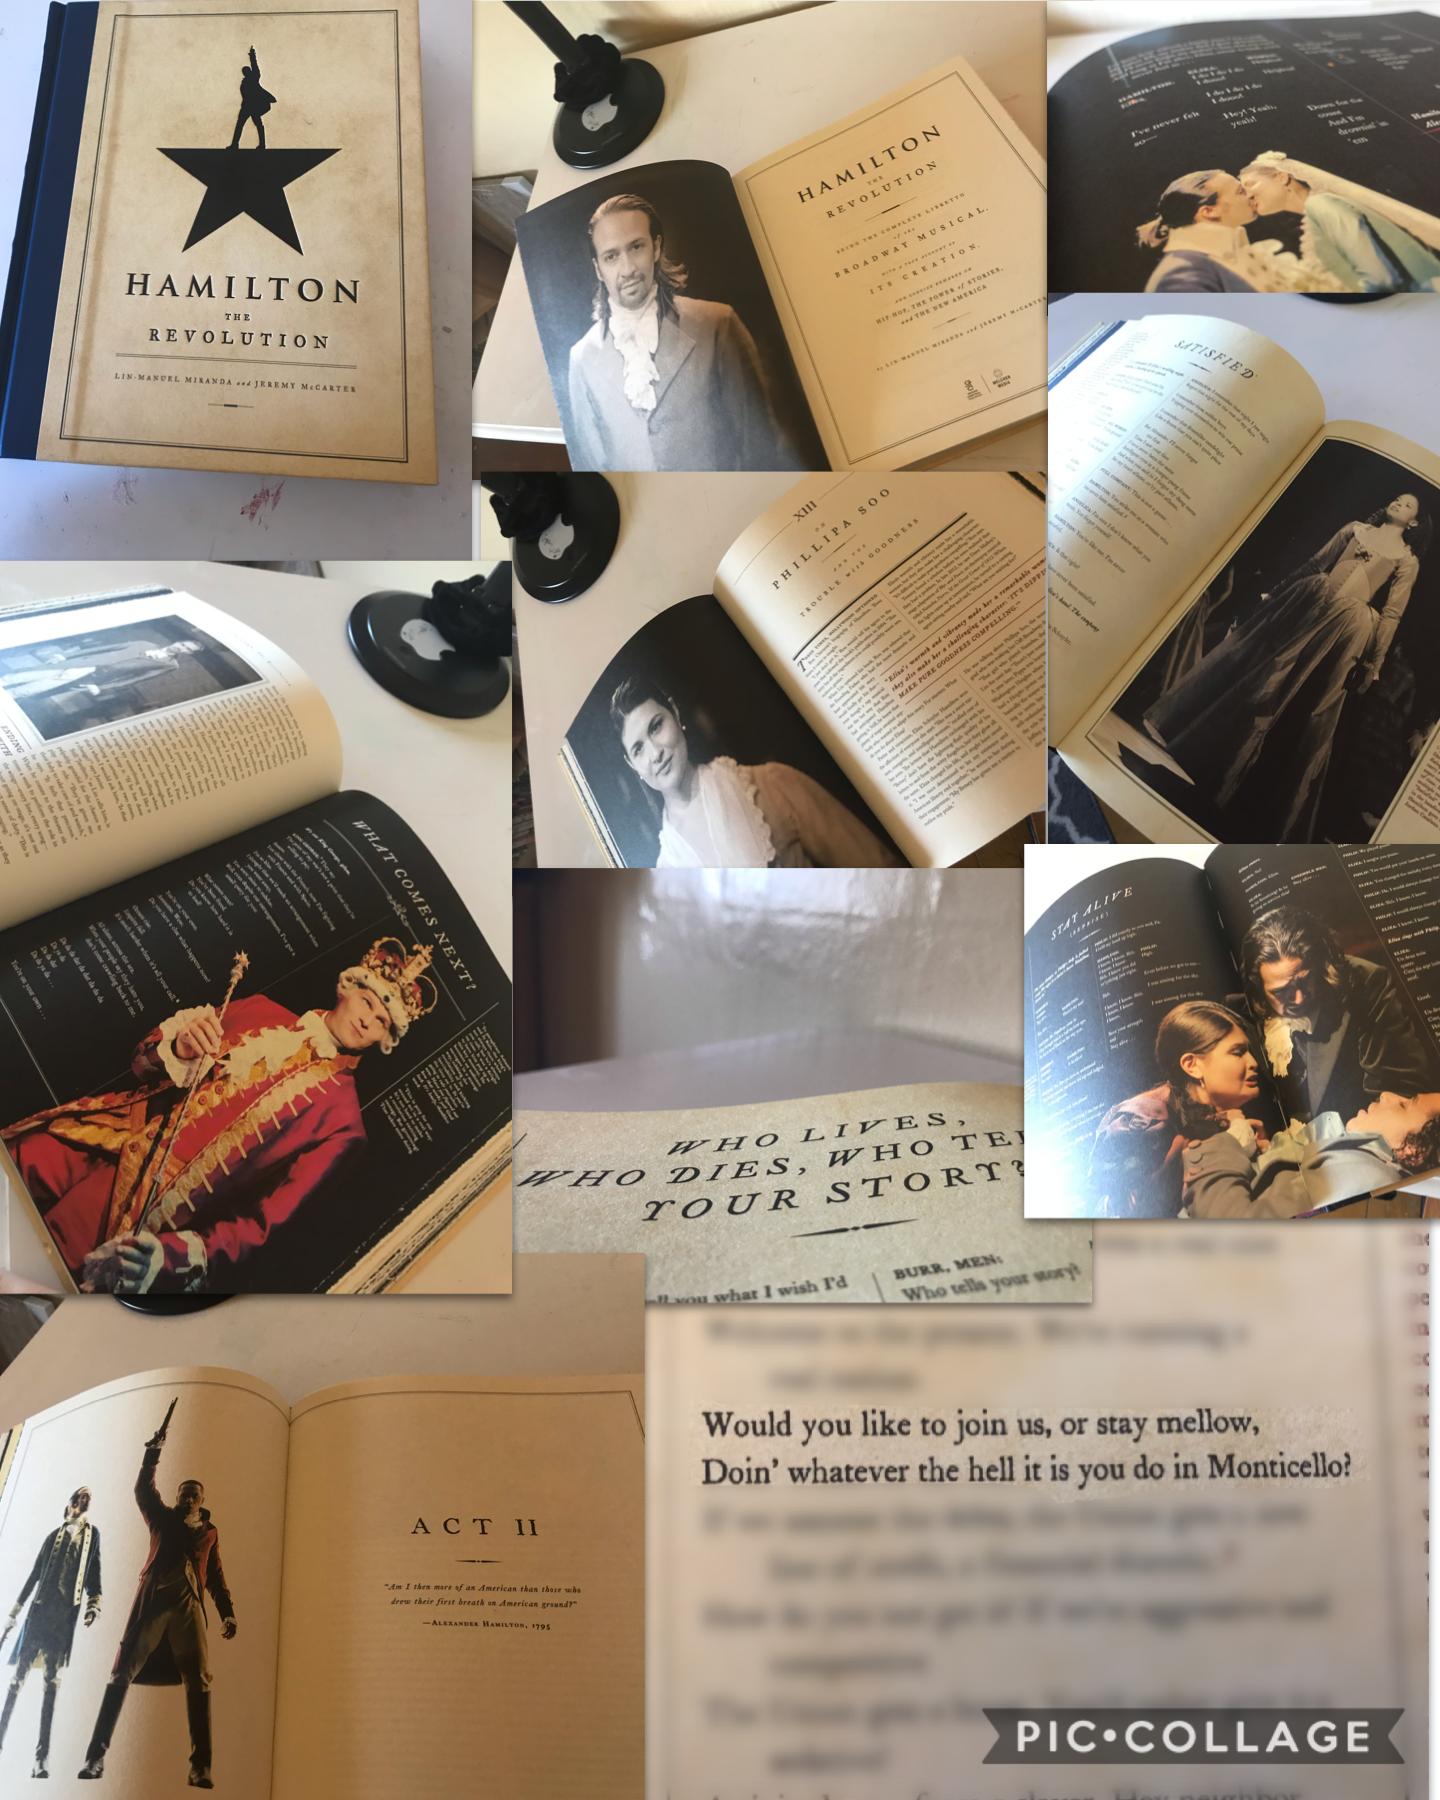 AHHHH 😱😱😱😱
I GOT THIS BEHIND THE SCENES HAMILTON BOOK WITH ALL KINDS OF STUFF I LOVE IT MORE IN THE CAPTIONS